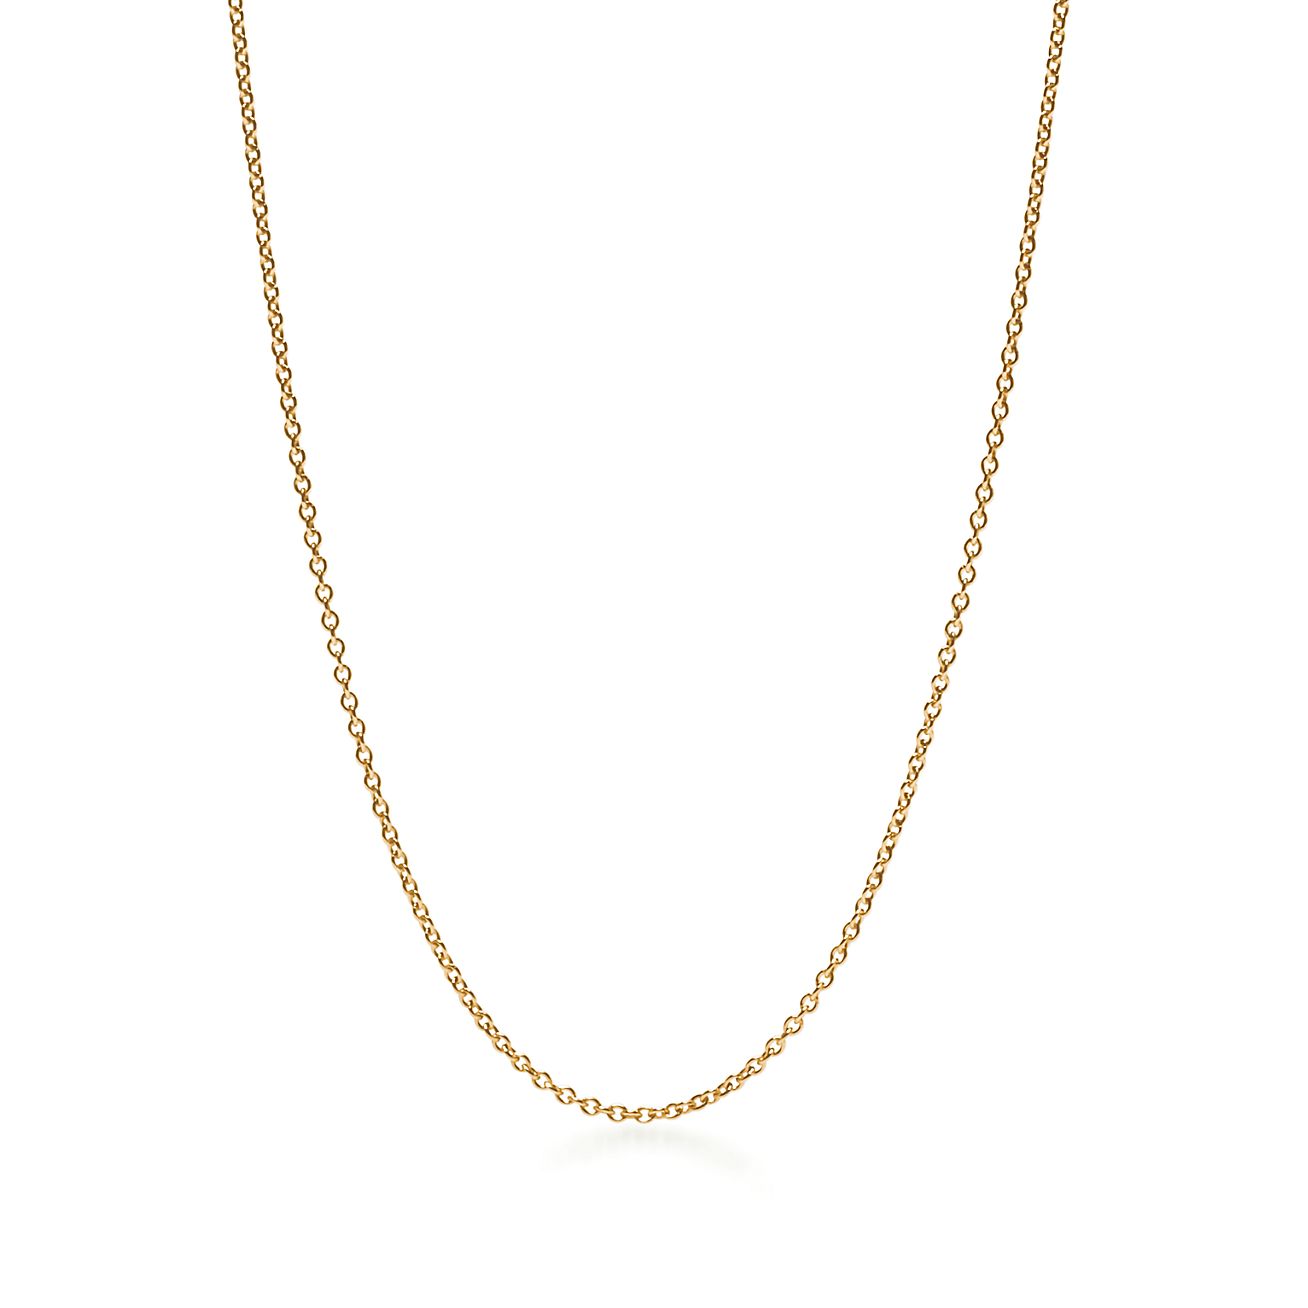 Shop 18K Gold Chain Necklace in 30